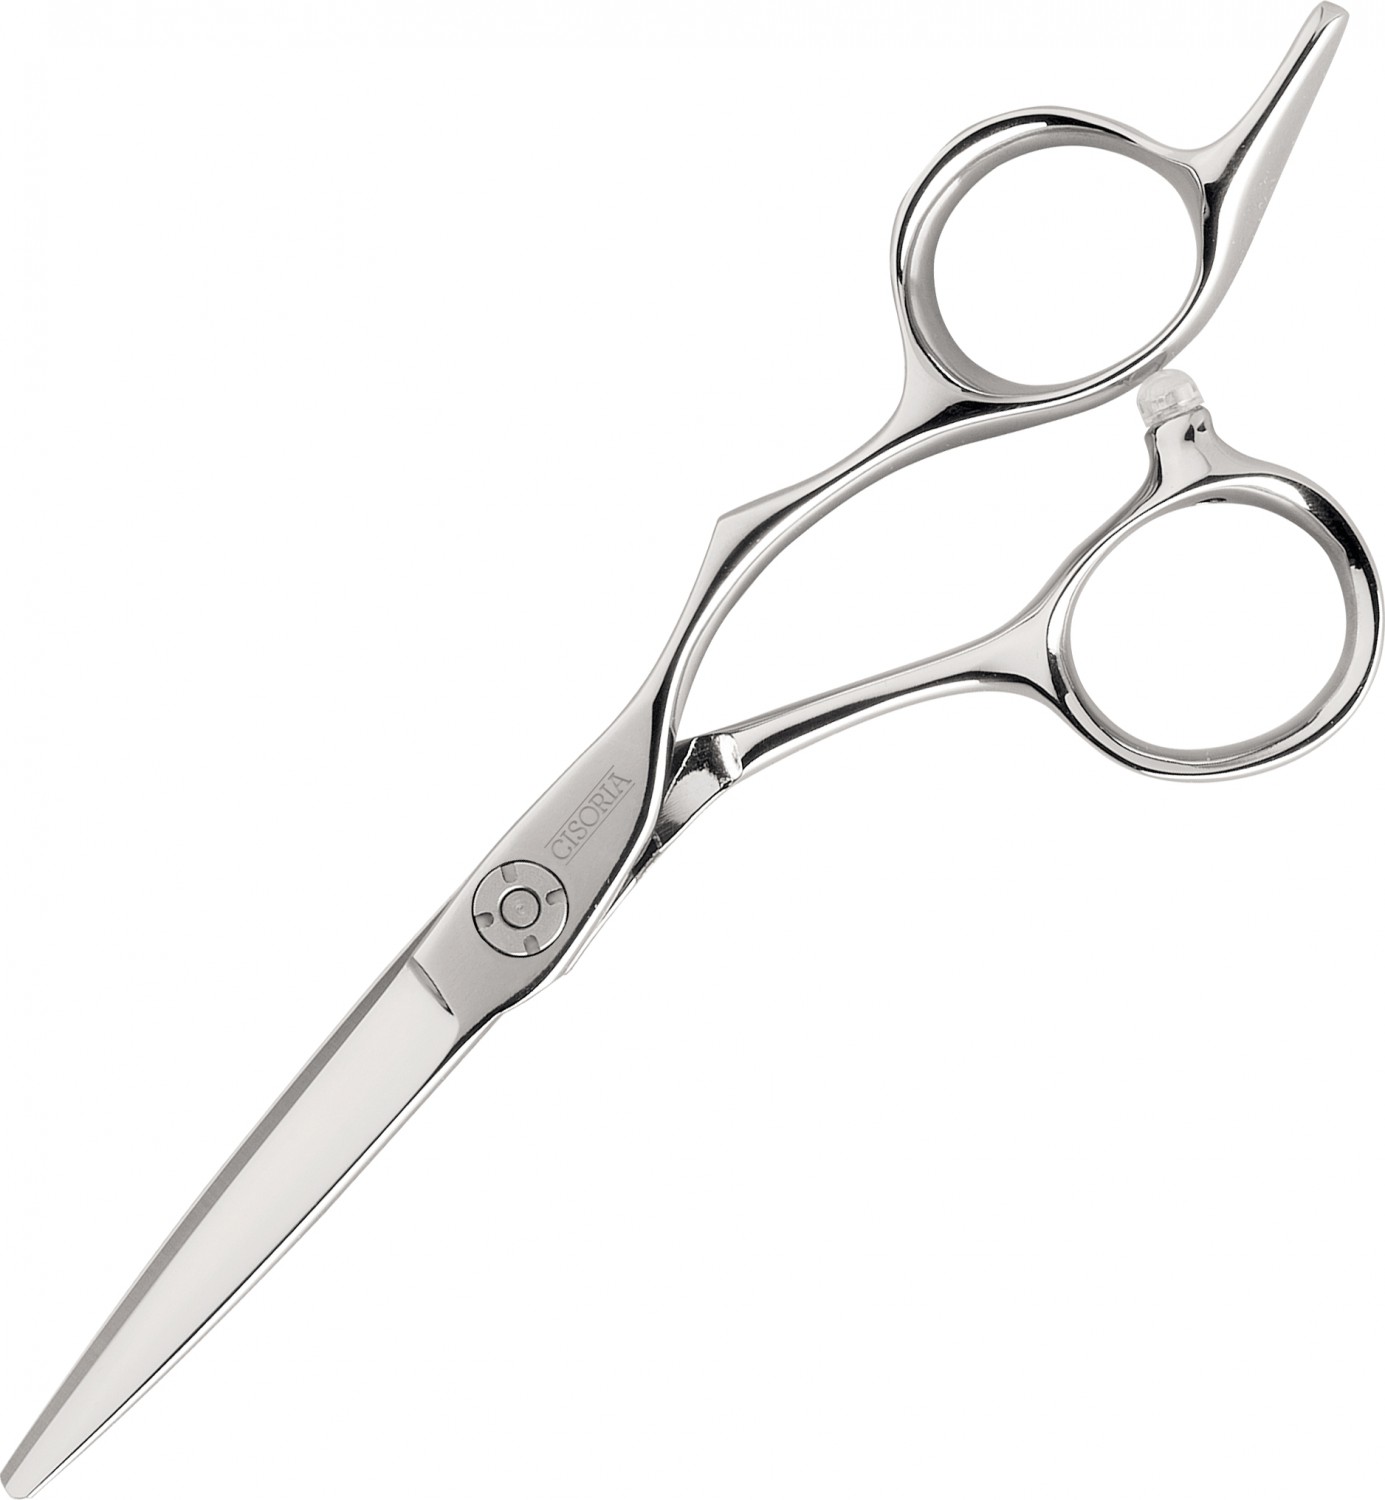  Cisoria Offset Cutting Scissors 5" OE500 by Sibel 